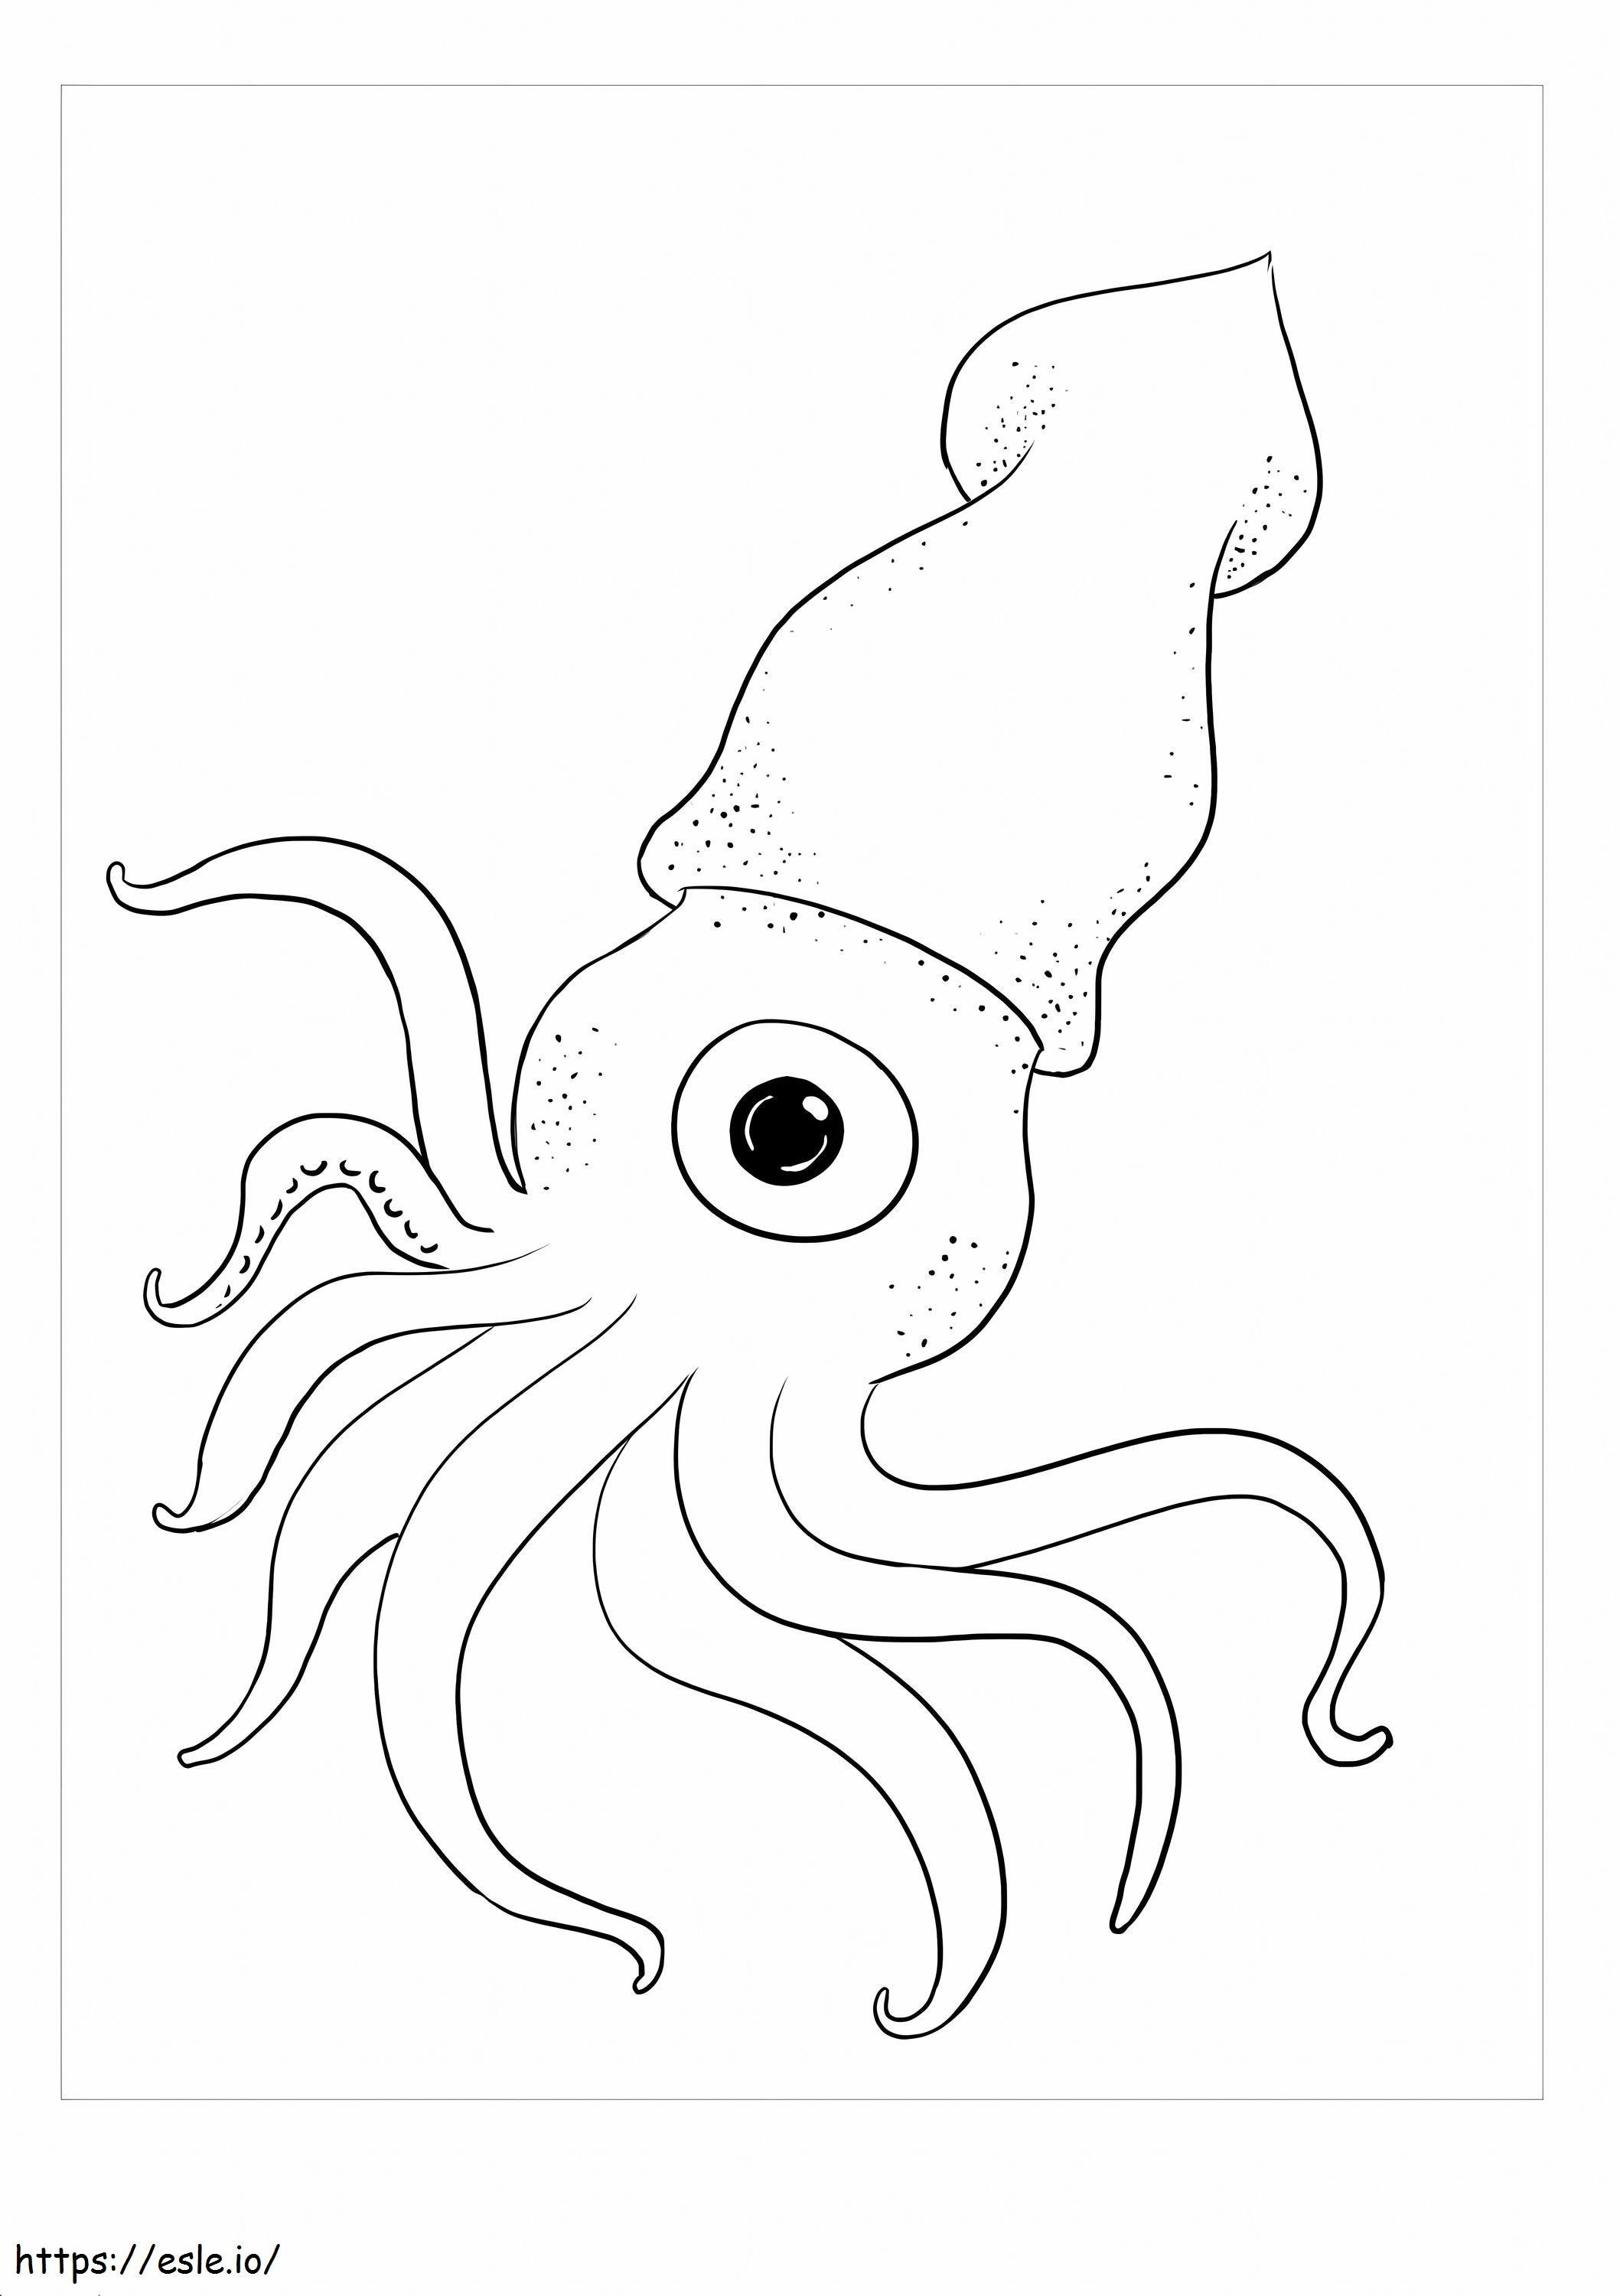 One Eyed Squid coloring page